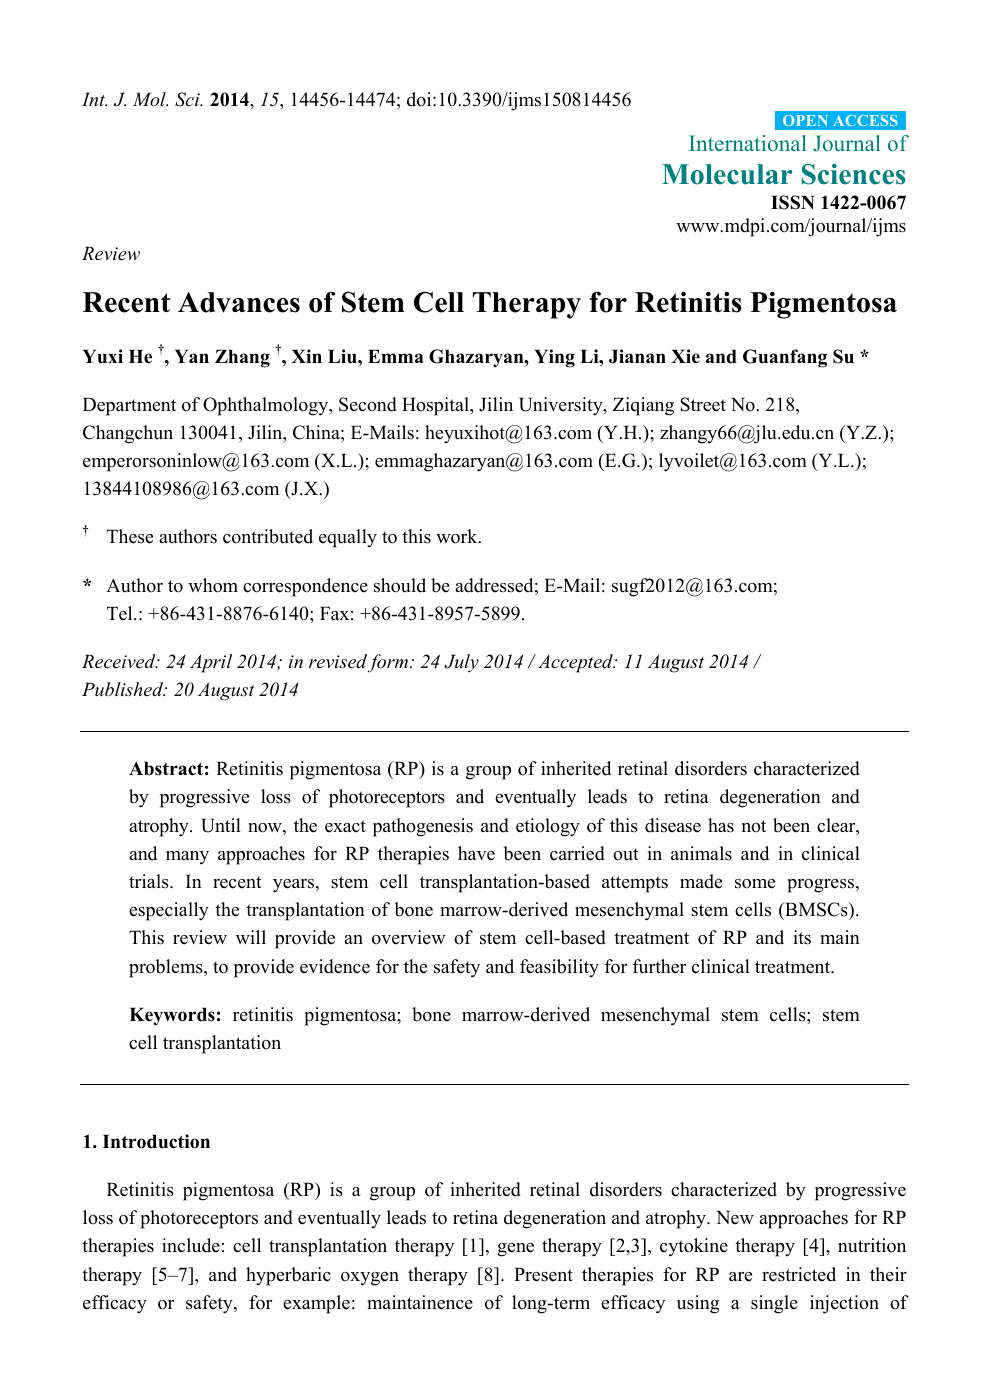 Recent Advances Of Stem Cell Therapy For Retinitis Pigmentosa Topic Of Research Paper In Biological Sciences Download Scholarly Article Pdf And Read For Free On Cyberleninka Open Science Hub